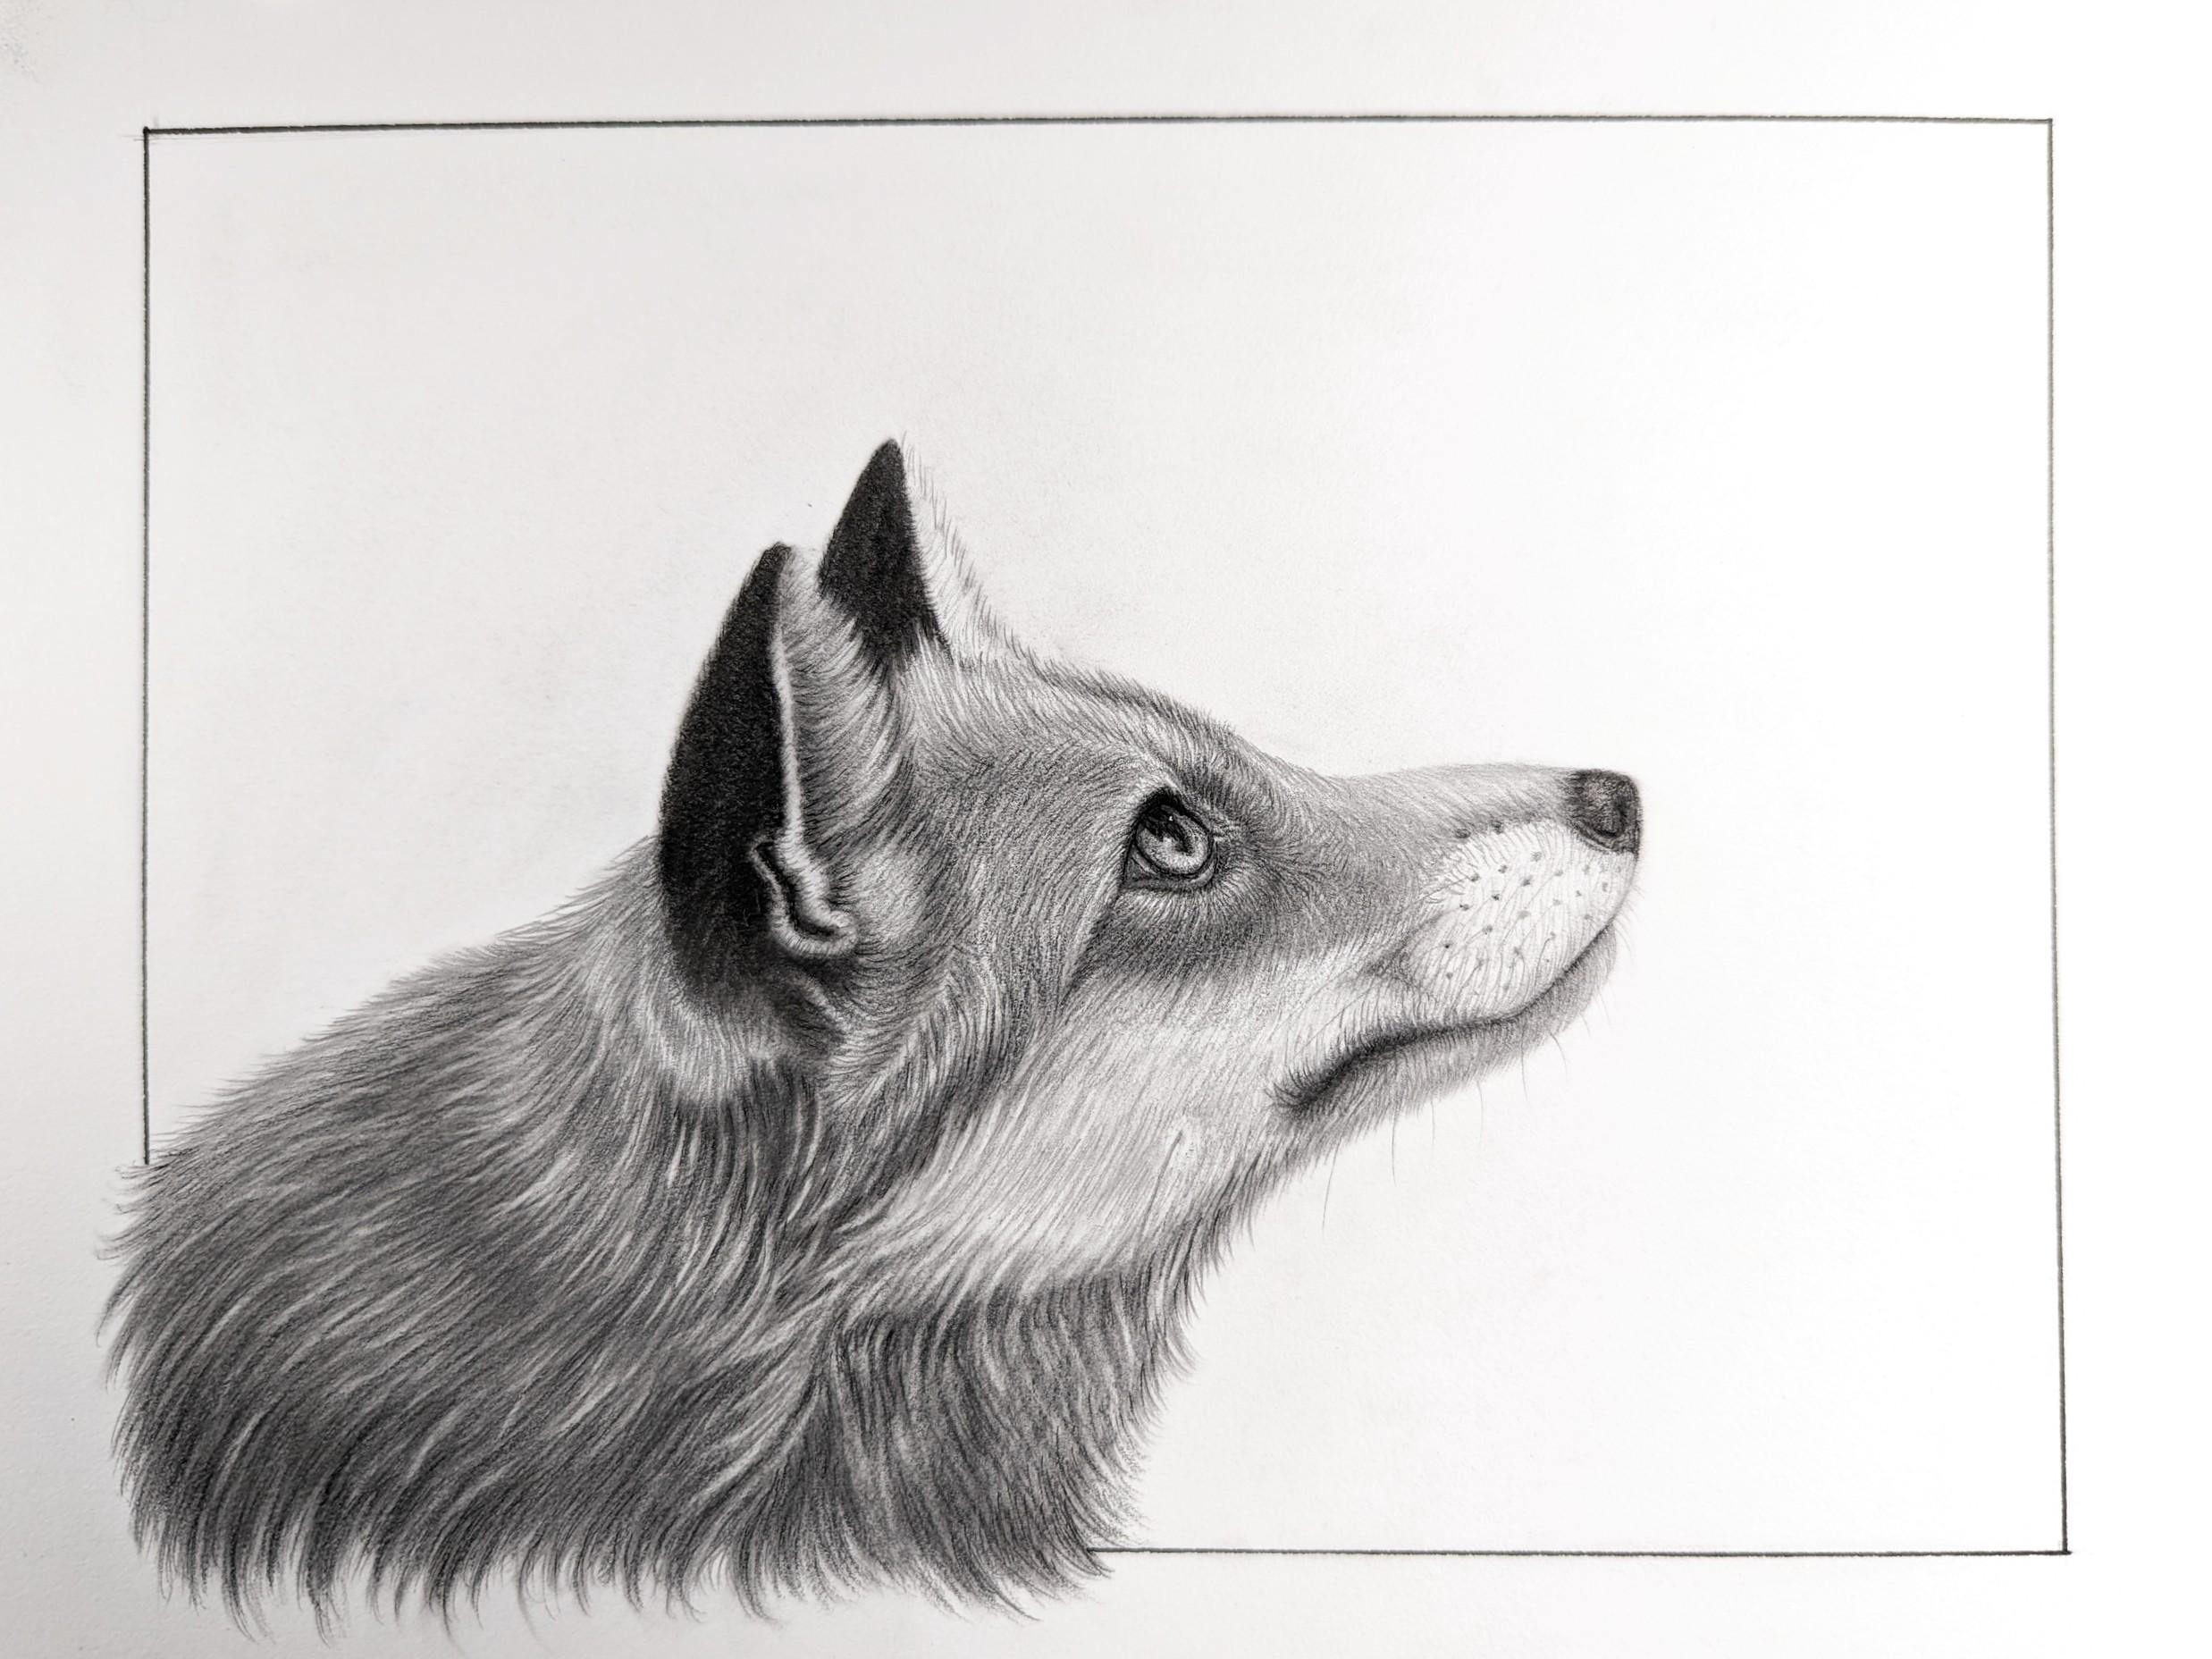 Tammy Liu-Haller Animal Art - "Things are Looking Up" Charcoal Drawing